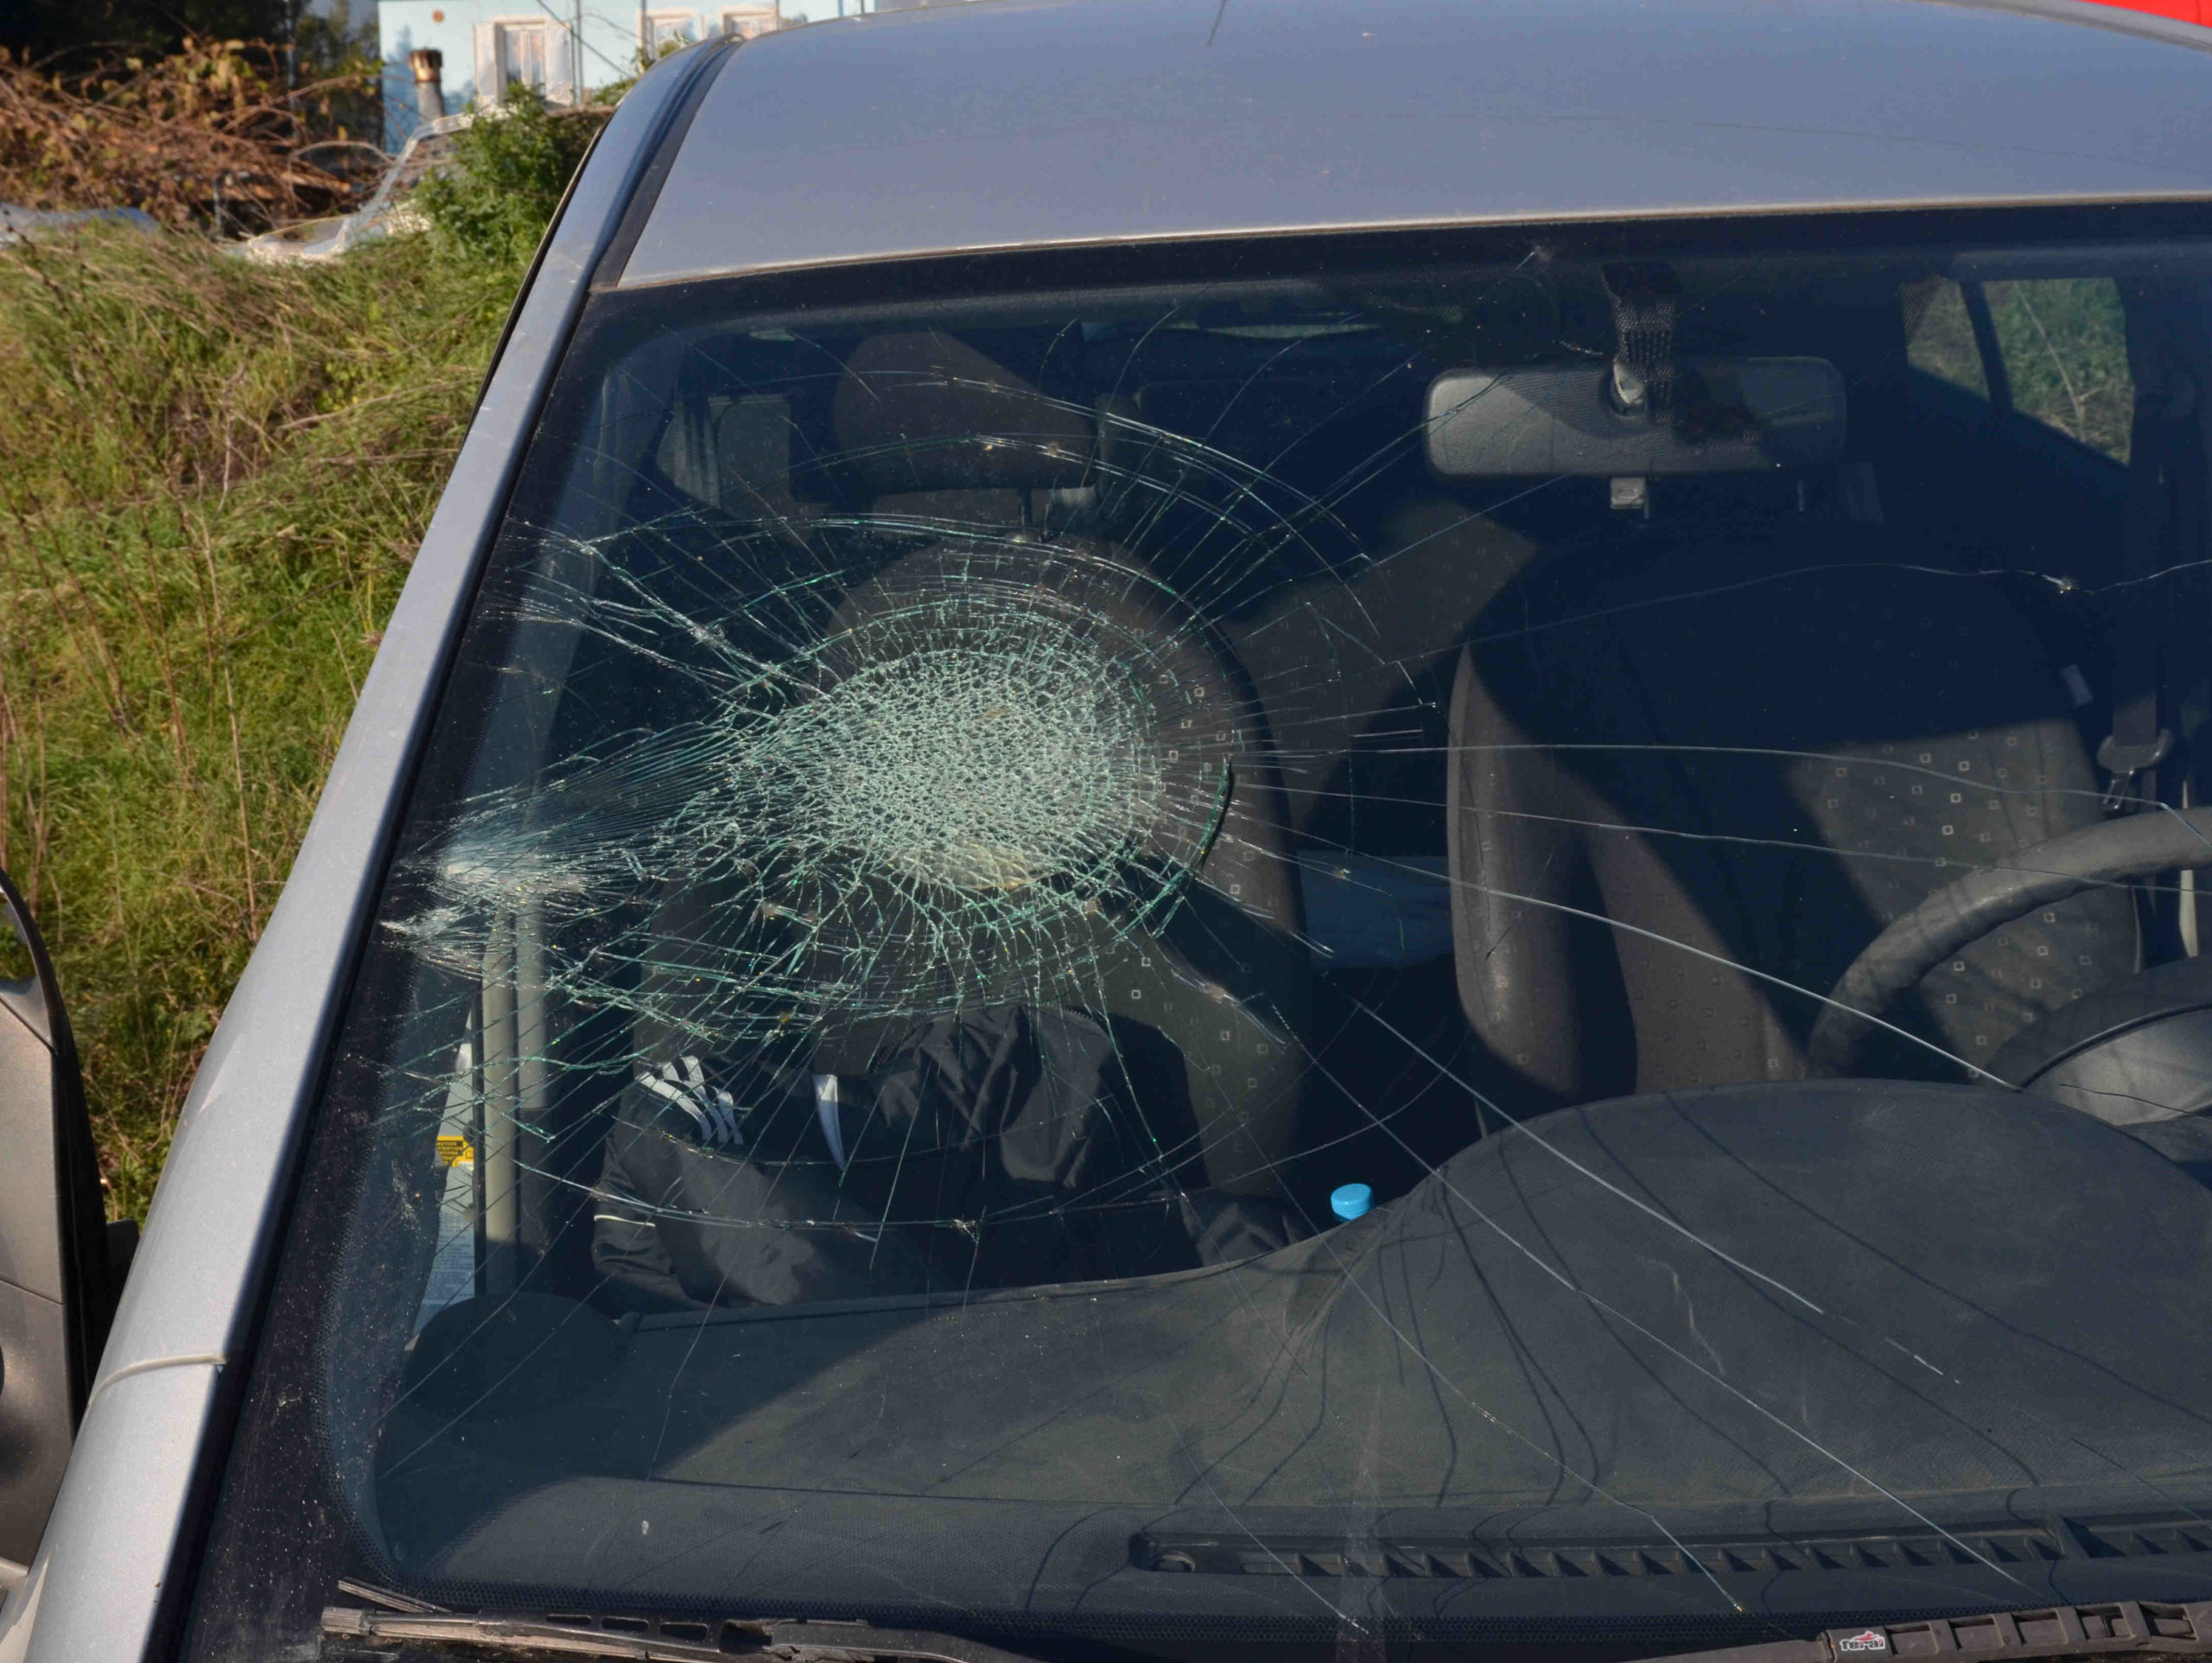 Who pays when a rock hits your windshield?